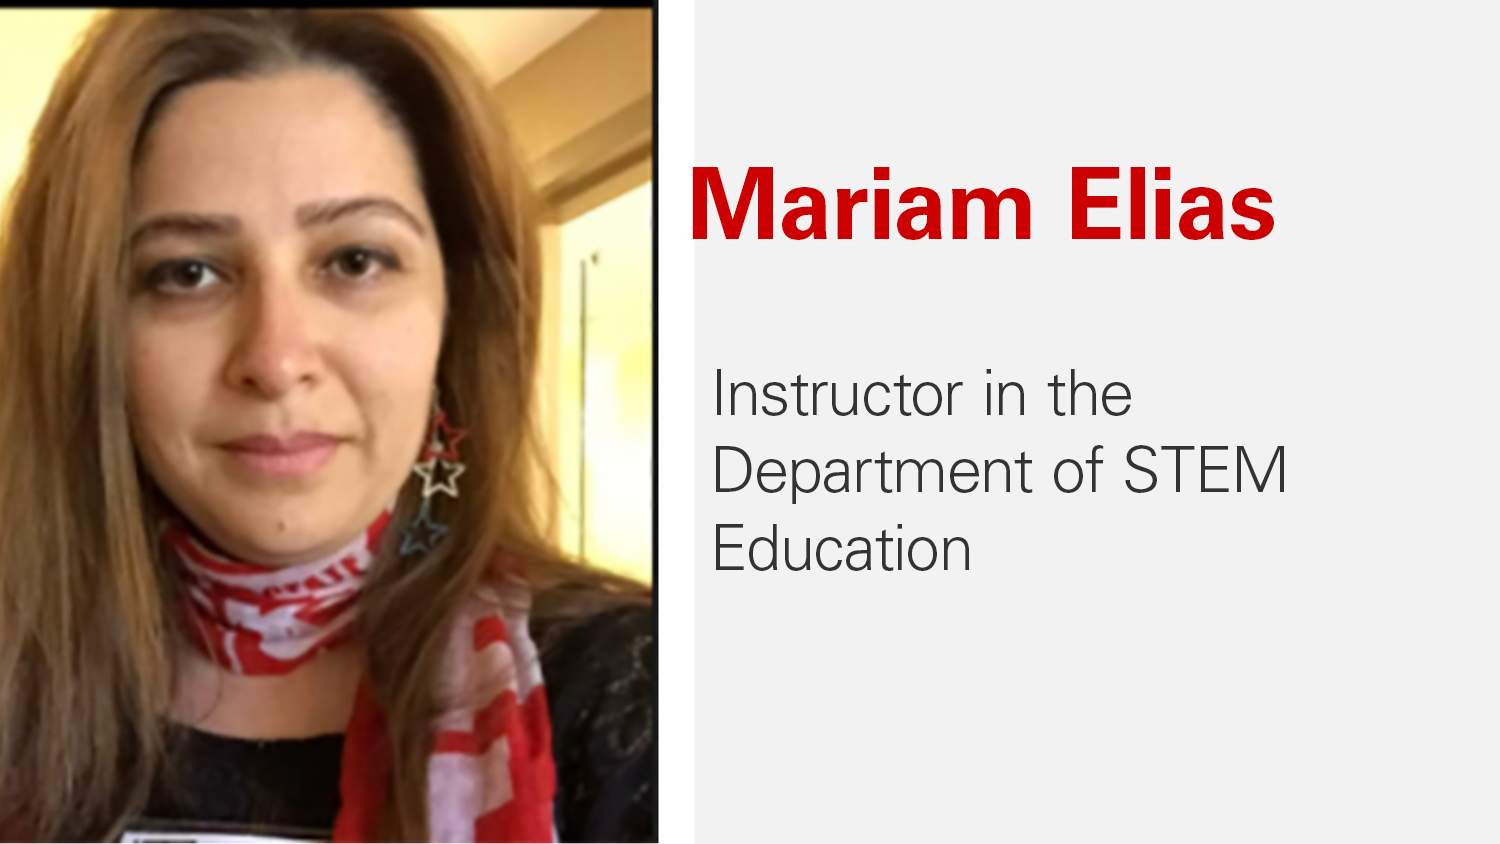 NC State College of Education Instructor Mariam Elias